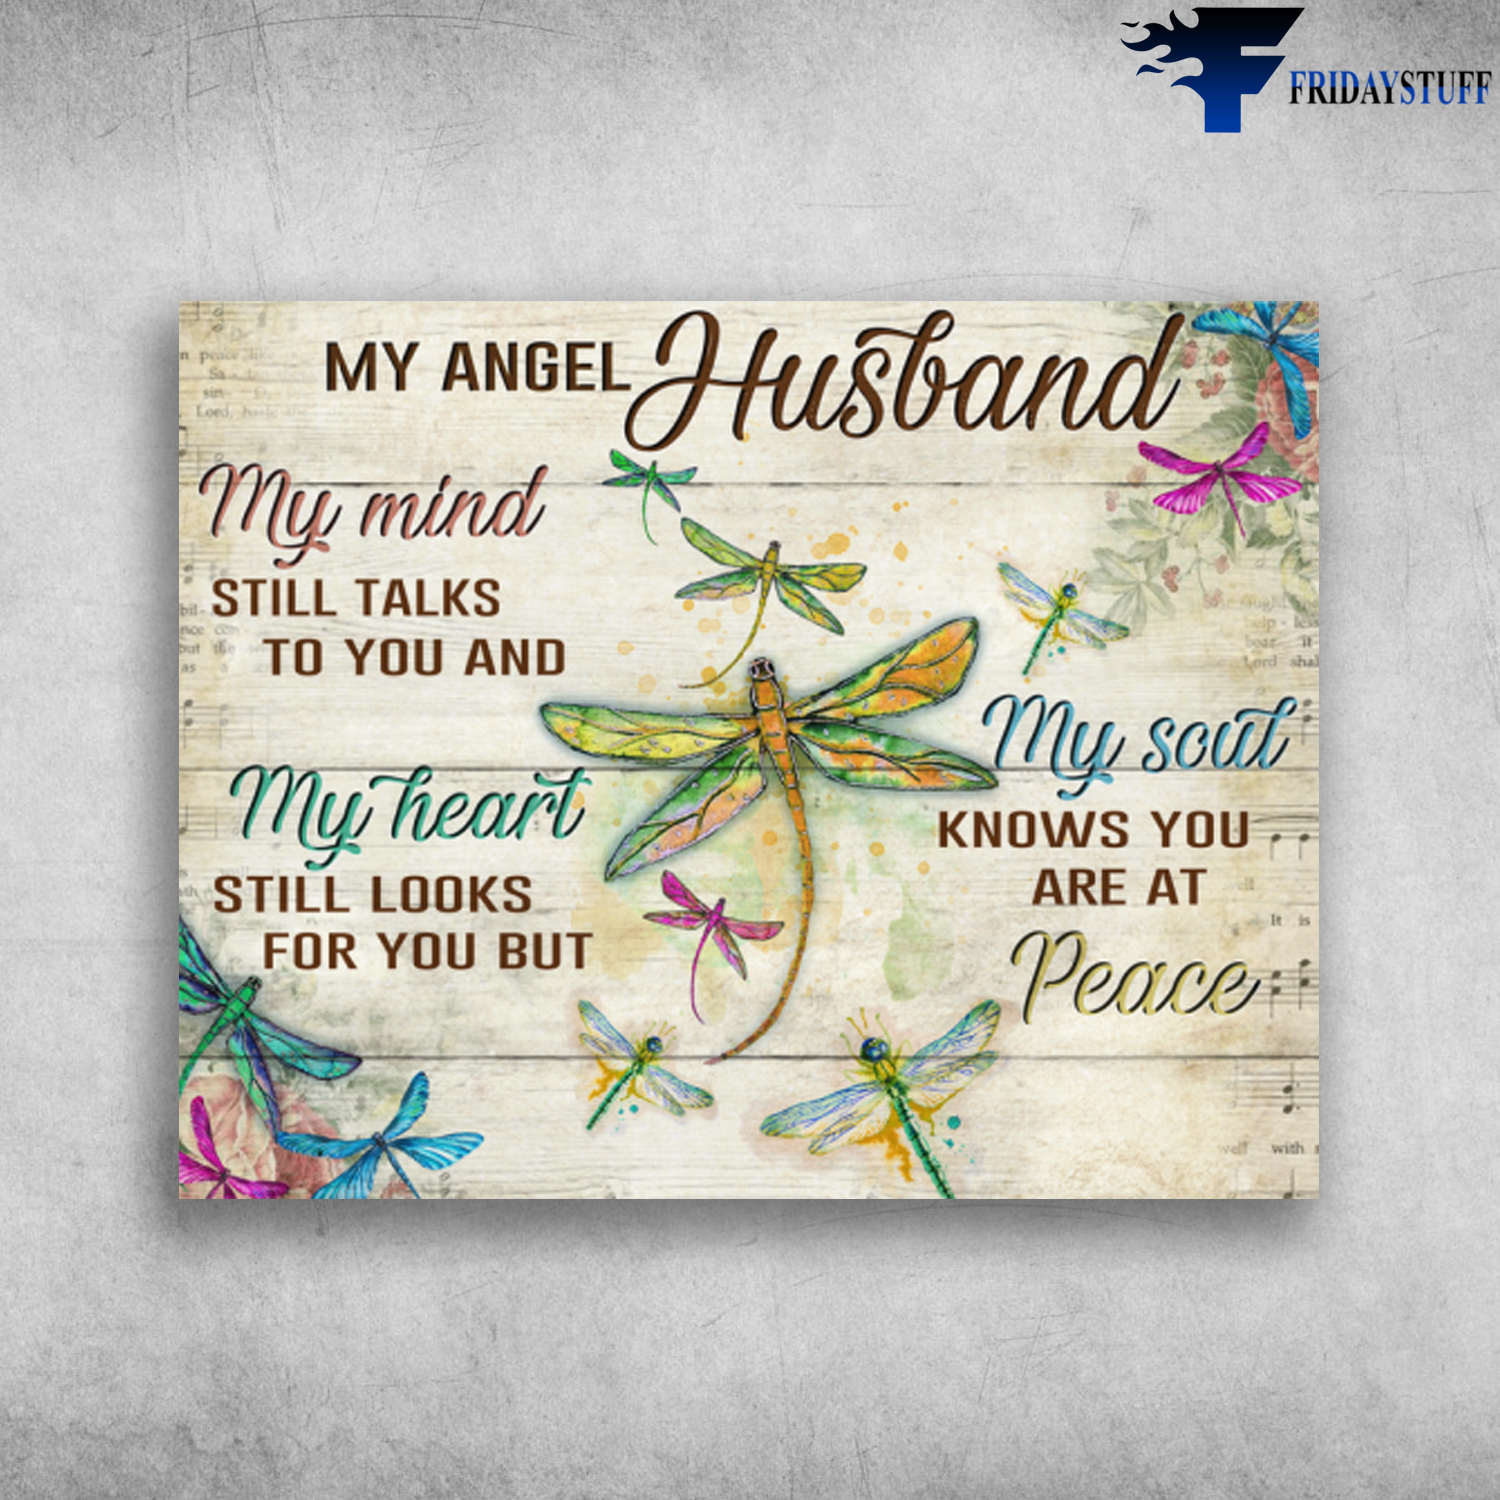 My Angel Husband My Heart Still Looks For You